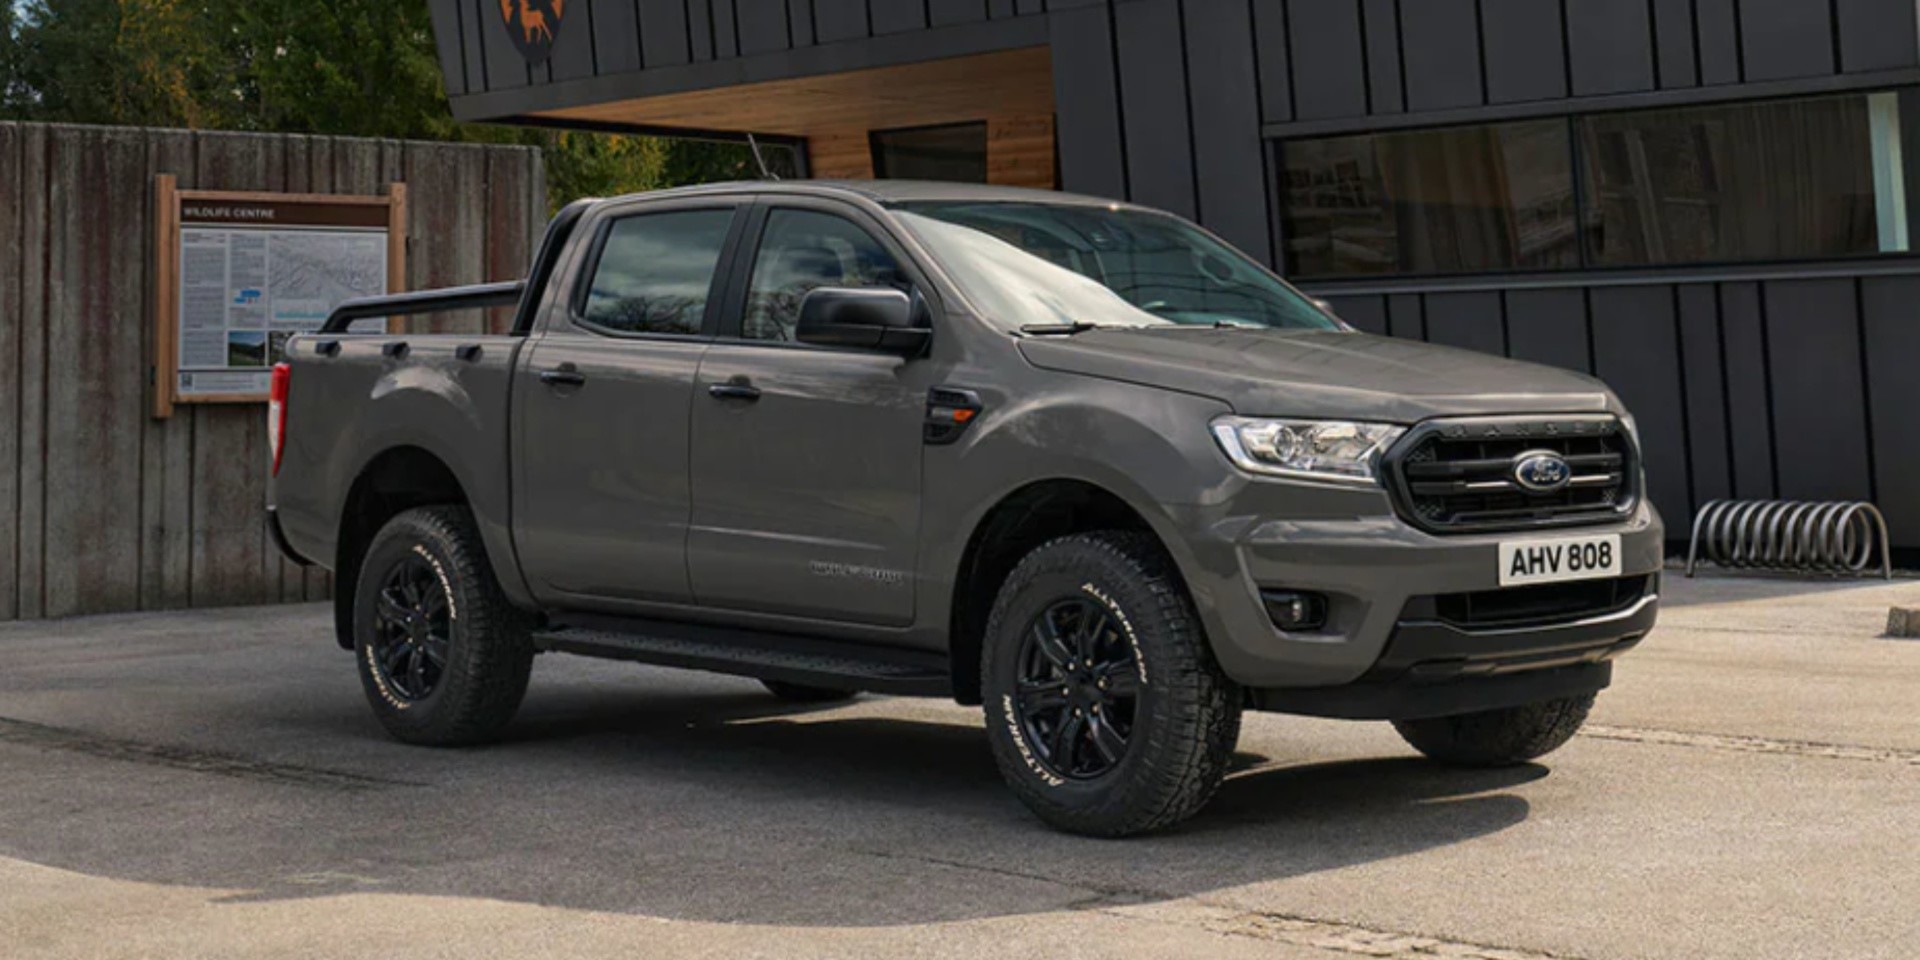 grey ford ranger parked next to house side view